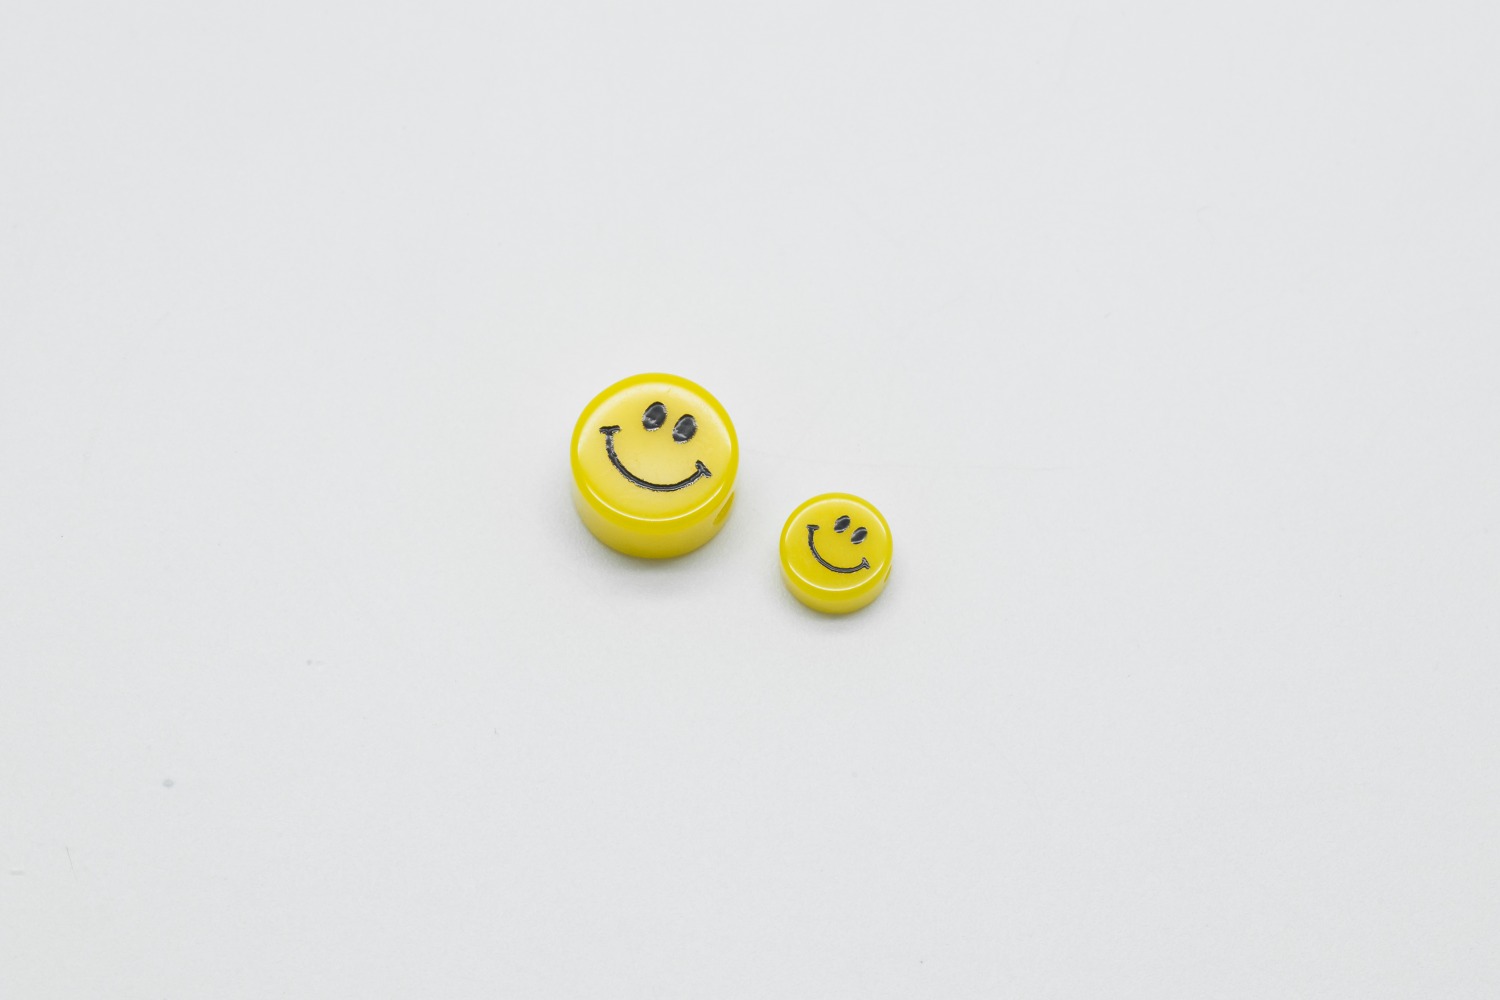 [V5-R2] Smiley face beads, Acrylic, Smiley face, Smile pendant, Necklace making, Unique charm, Jewelry supplies, 30 pcs